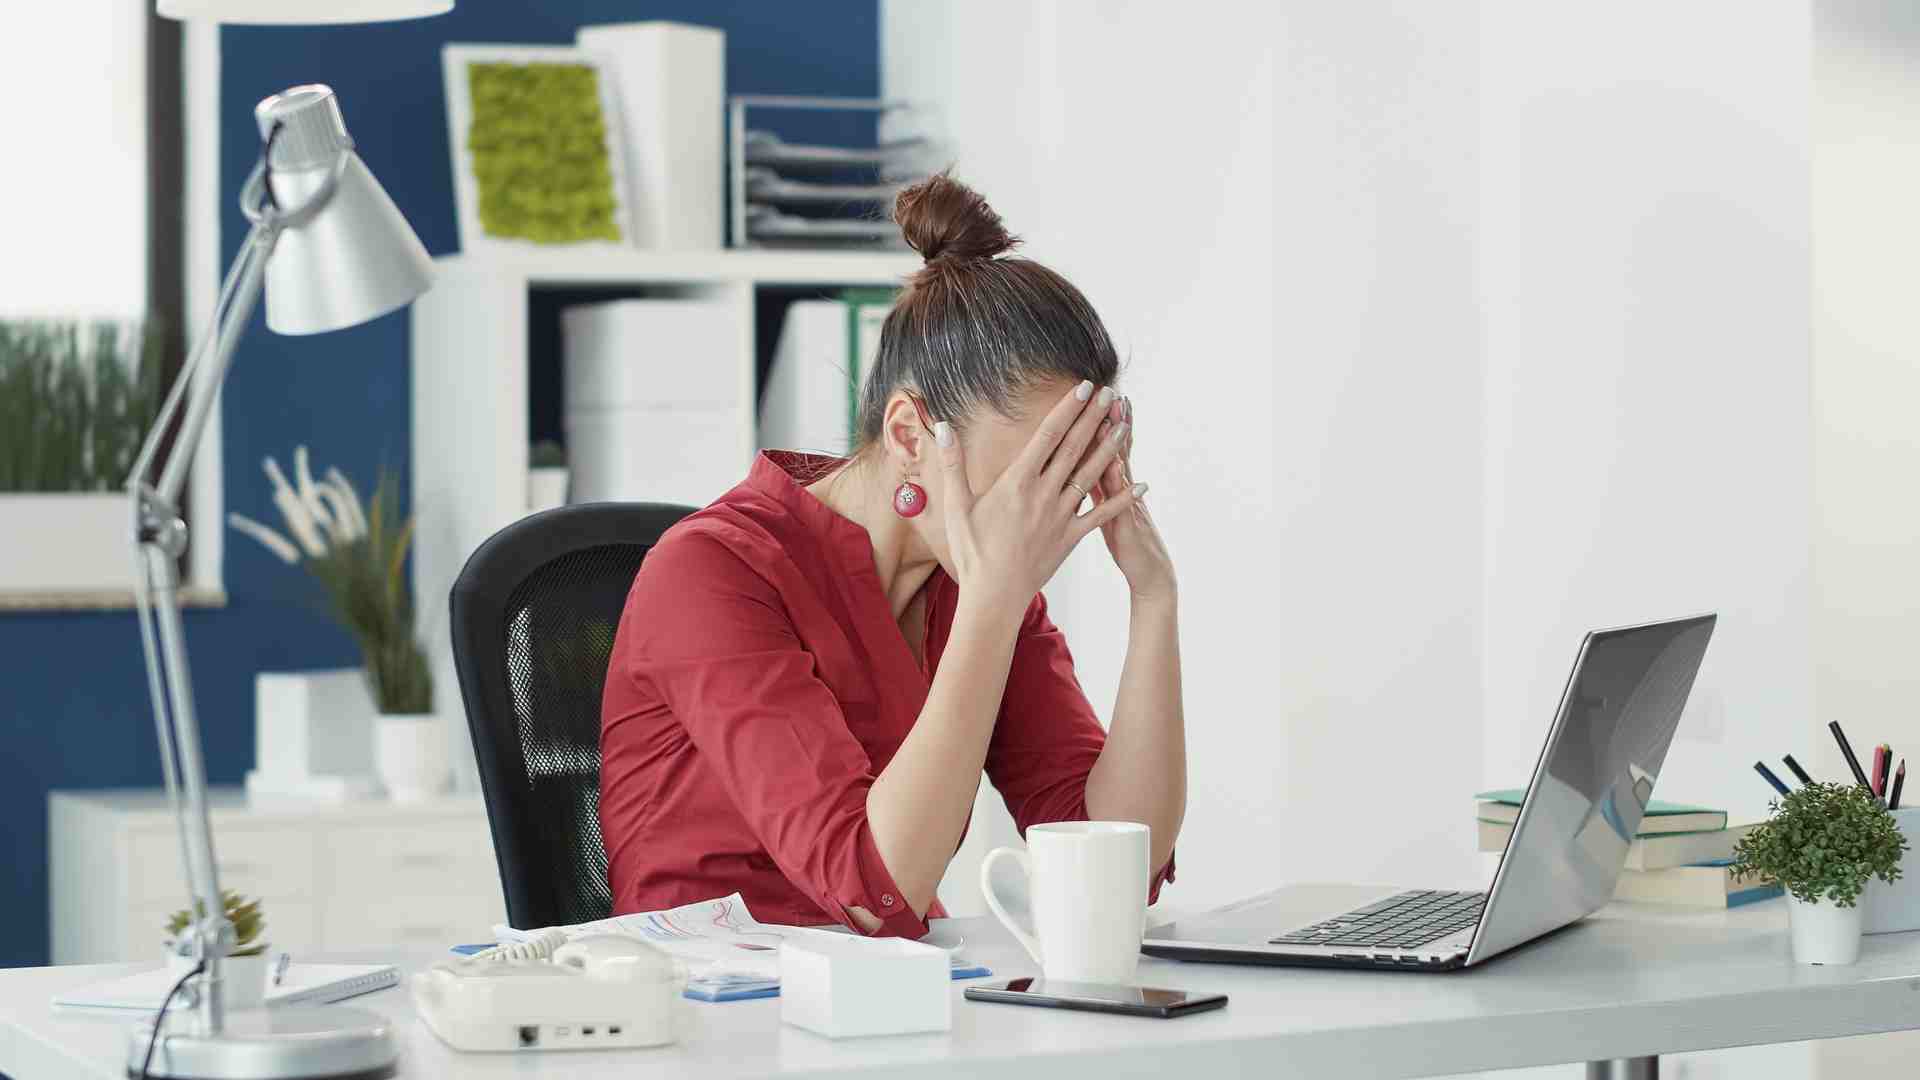 Stressed employee making mistake at office startup job, using sales statistics to do data research. Disappointed woman feeling displeased with business company failure, working on laptop.